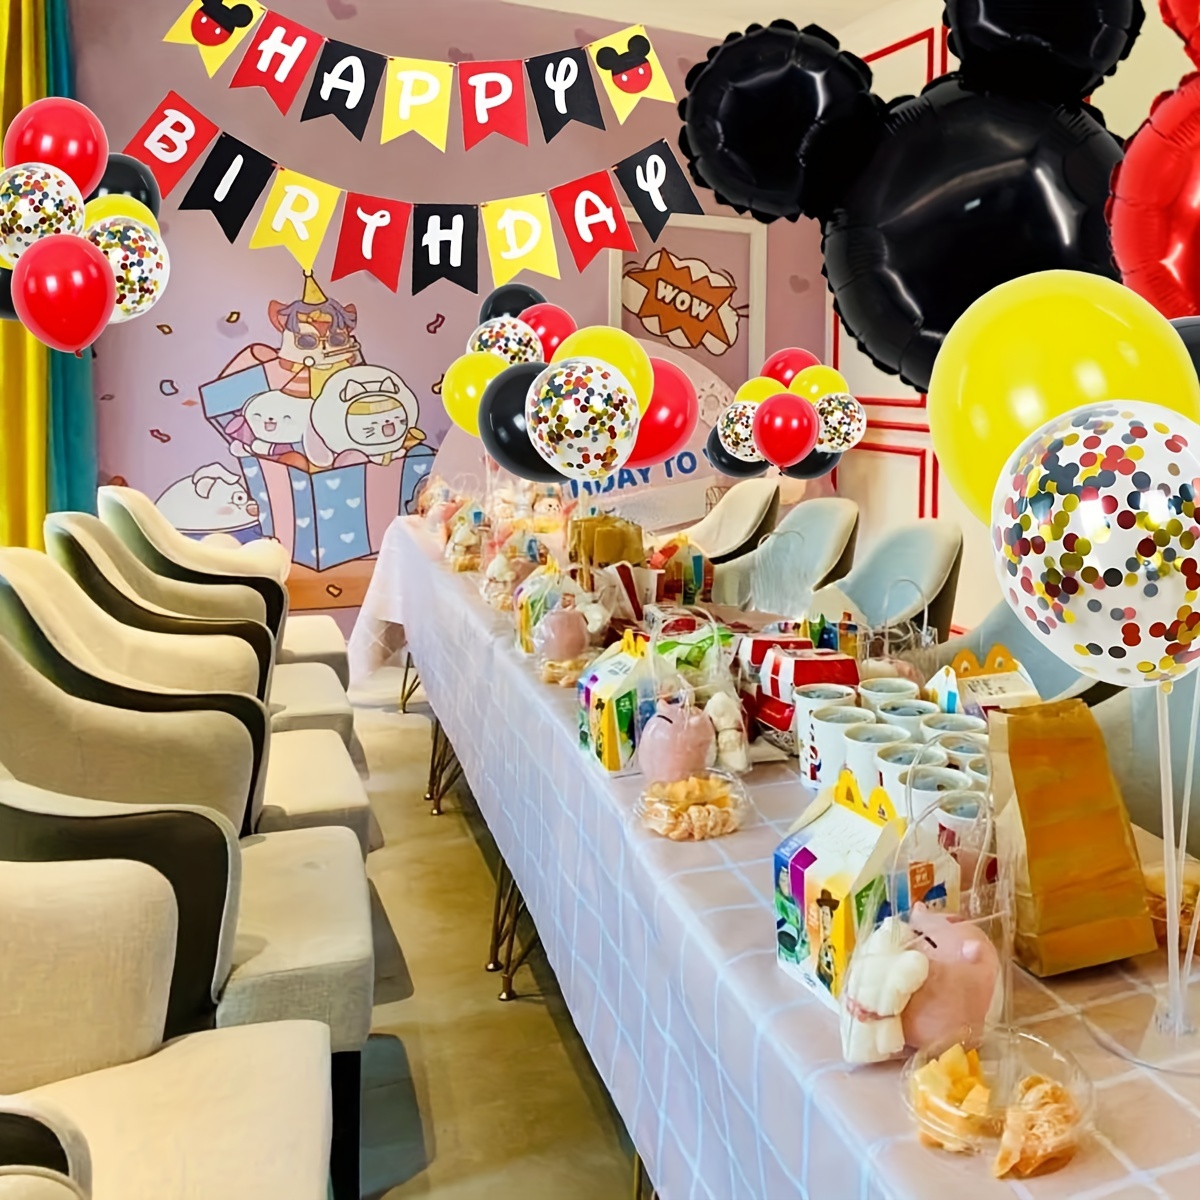 Glittery Birthday Themed Decor  Balloon Party Decorations in